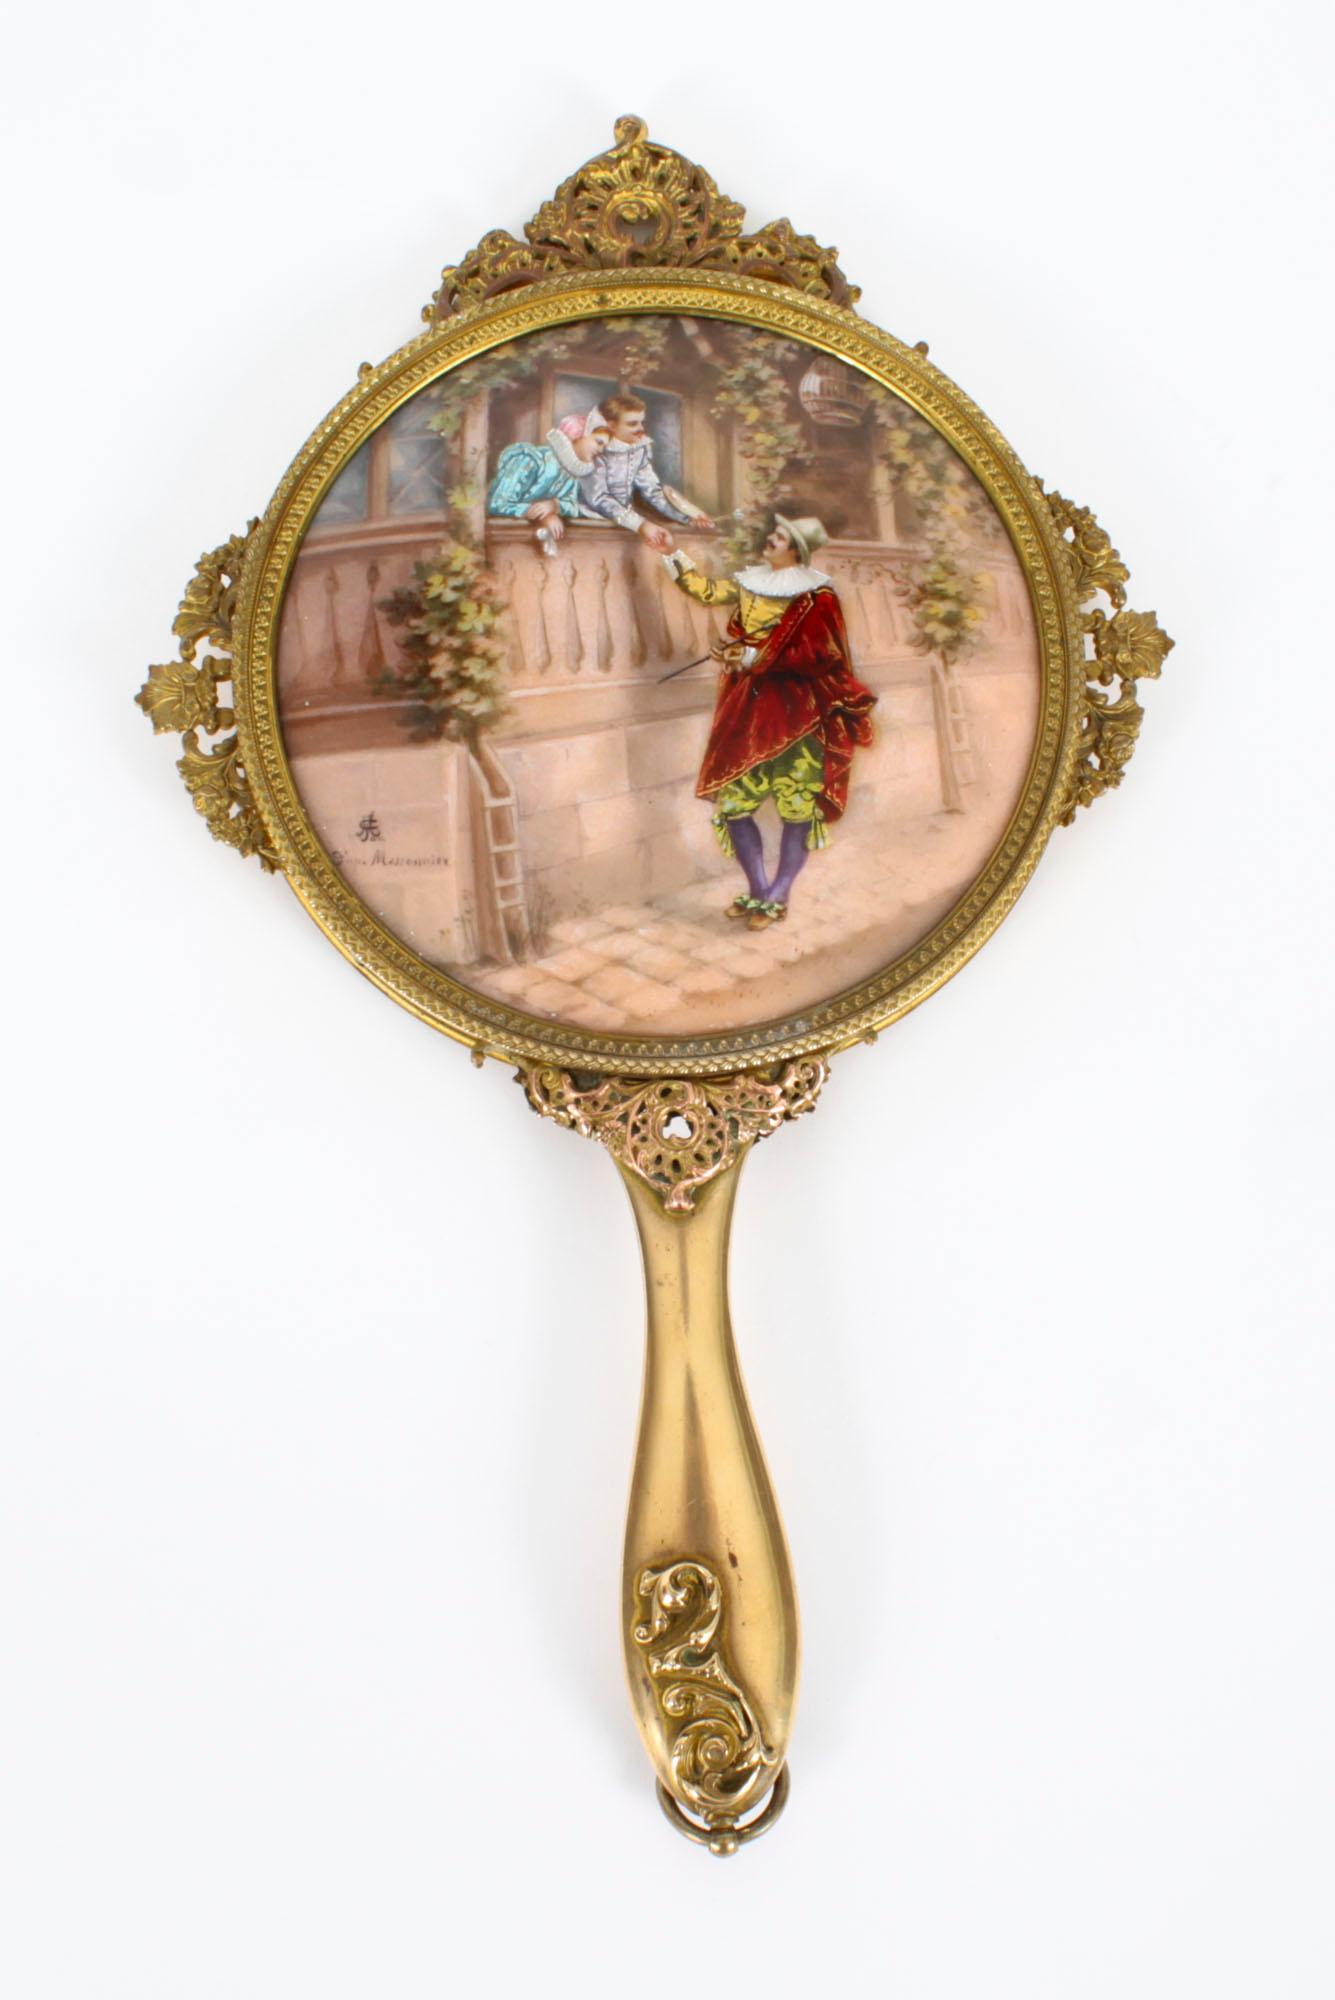 Antique French Limoges Ormolu Hand-Mirror, Signed Joseph Meissonnier 19th C For Sale 11